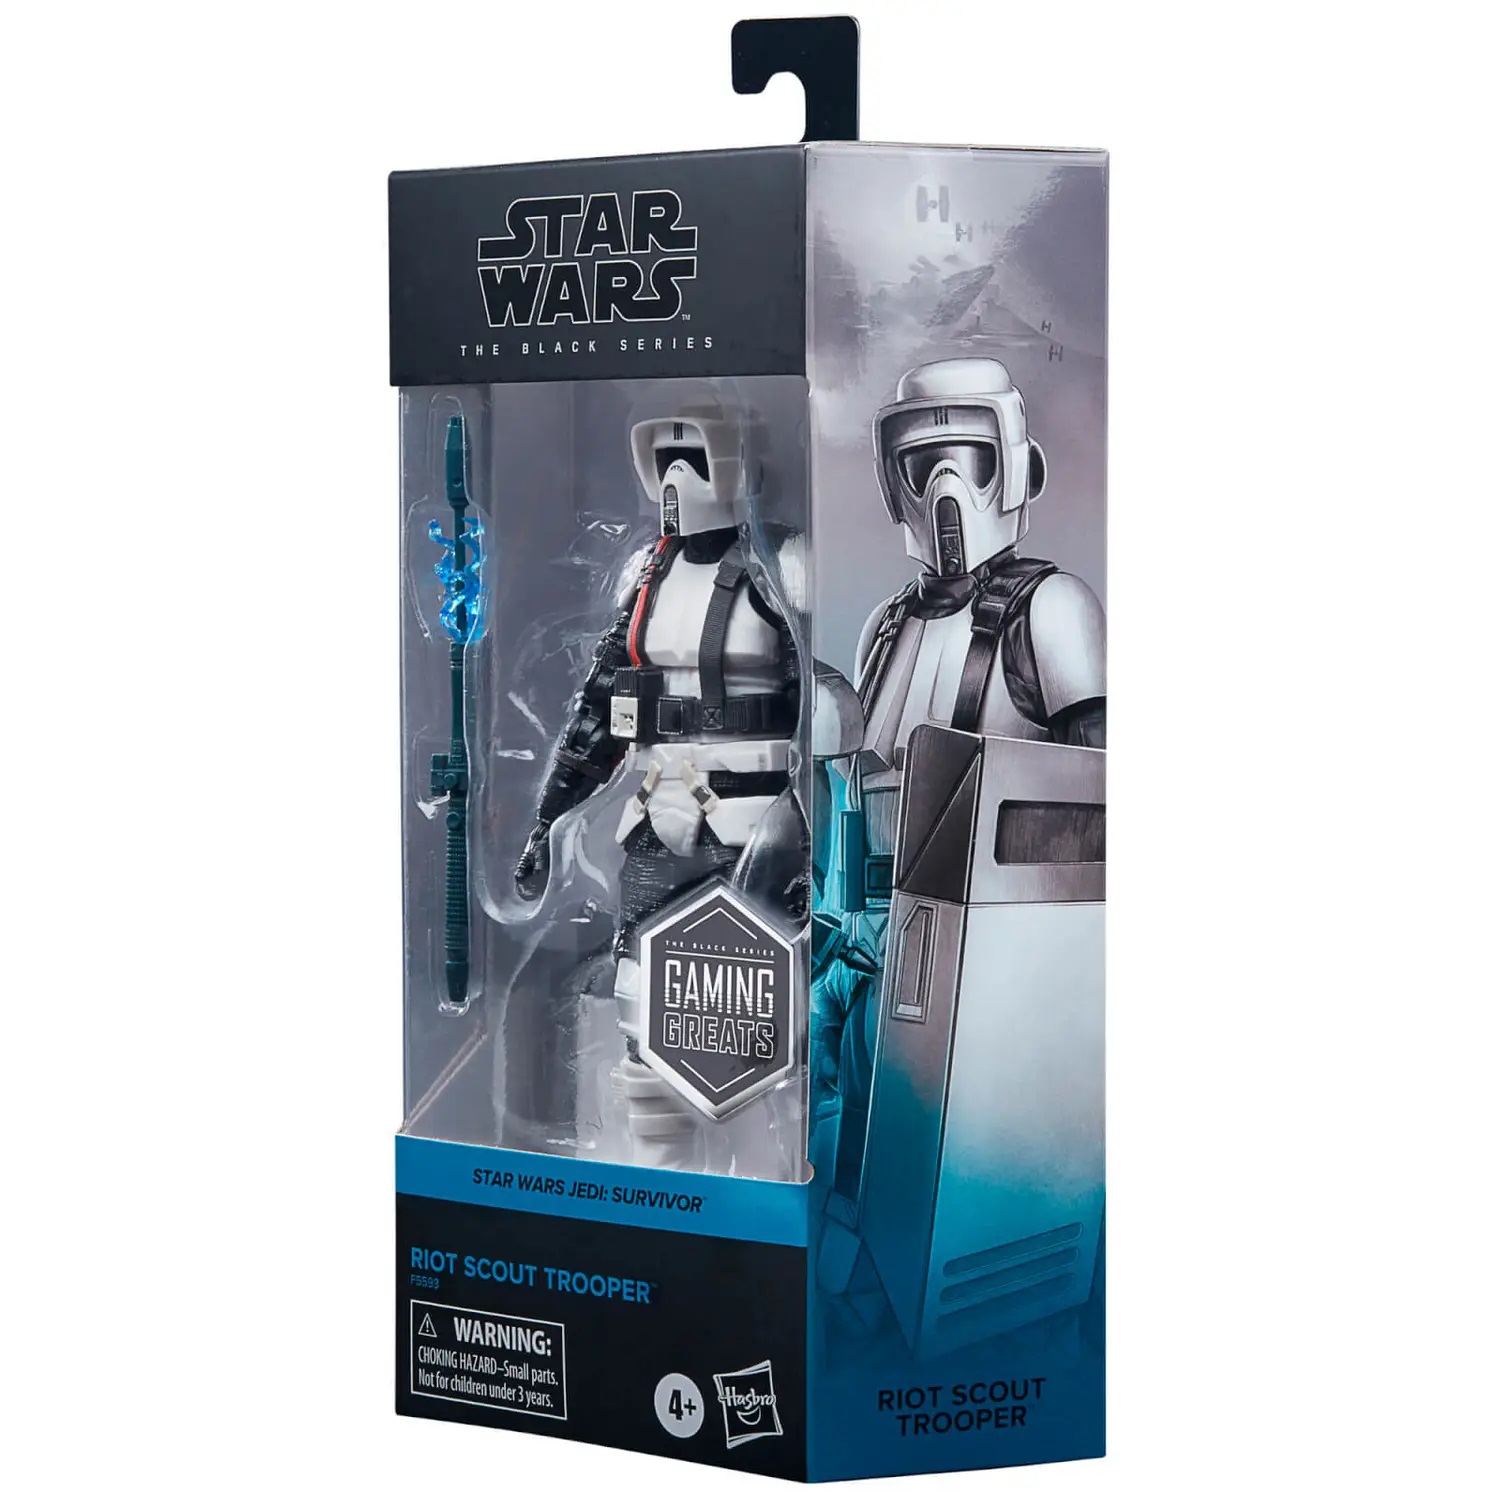 Star Wars The Black Series Gaming Greats Riot Scout Trooper  